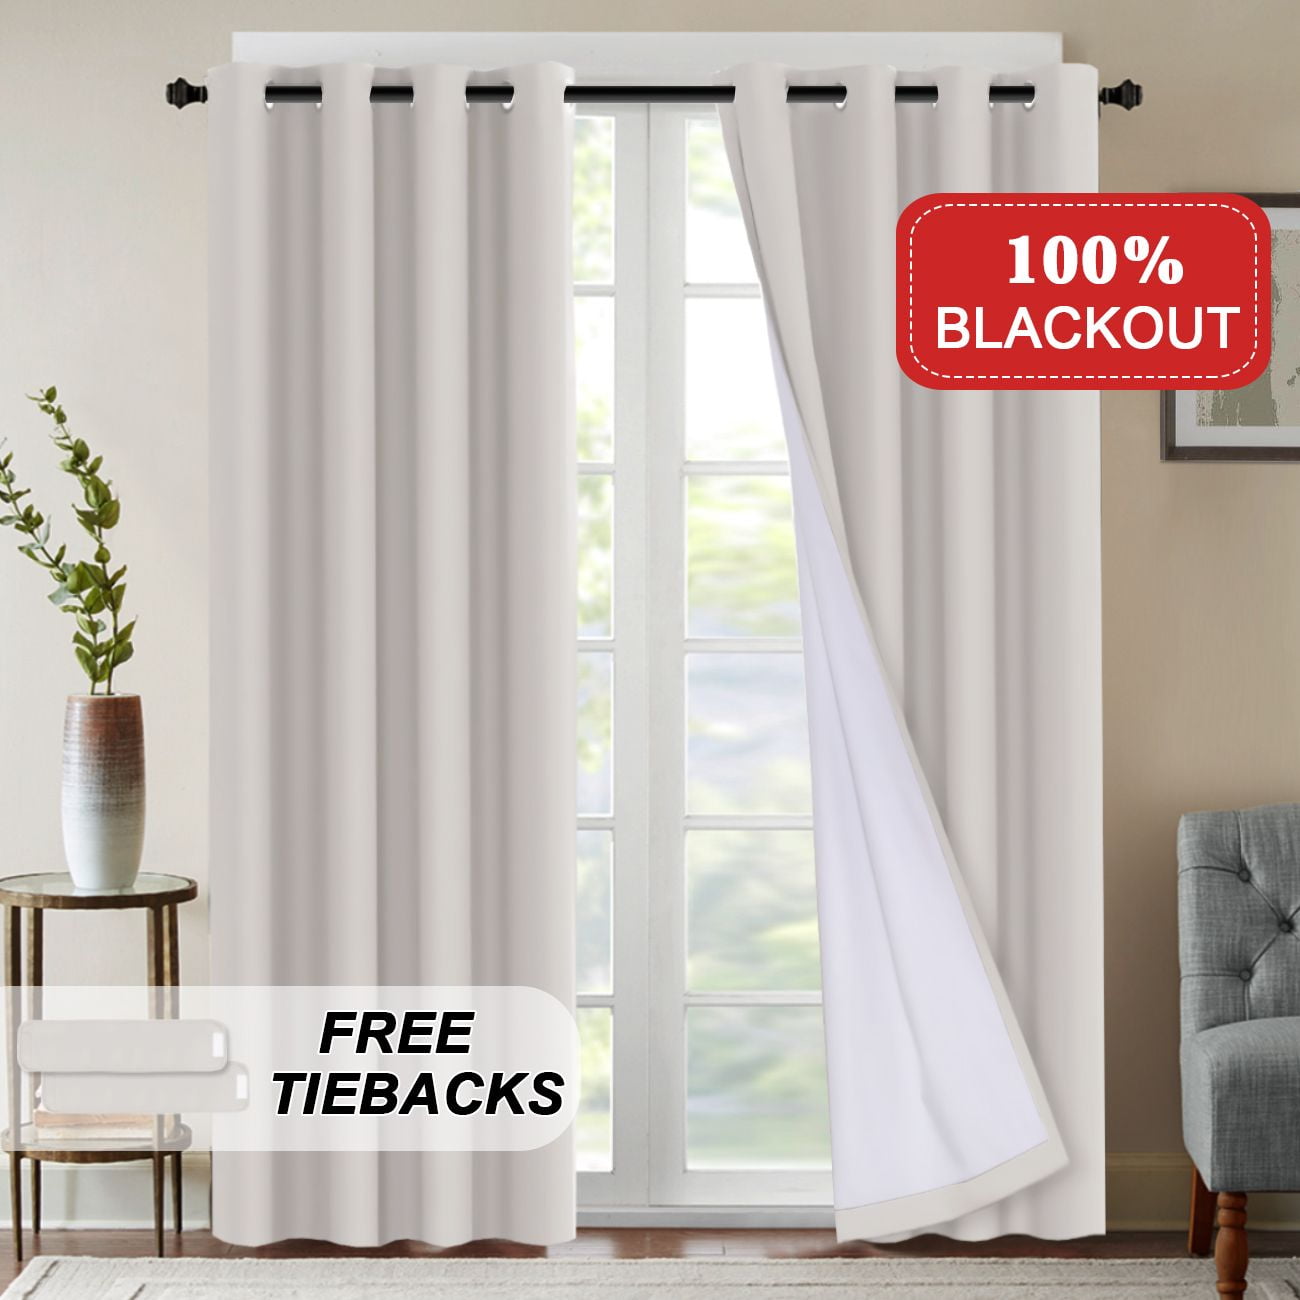 Khaki 100% Blackout Curtains for Bedroom/Living Room Full Light Blocking Curtain Draperies with Liner Thermal Insulated Energy Saving Absolutely Blackout Window Drapes 2 Panels 108 Inches Long 